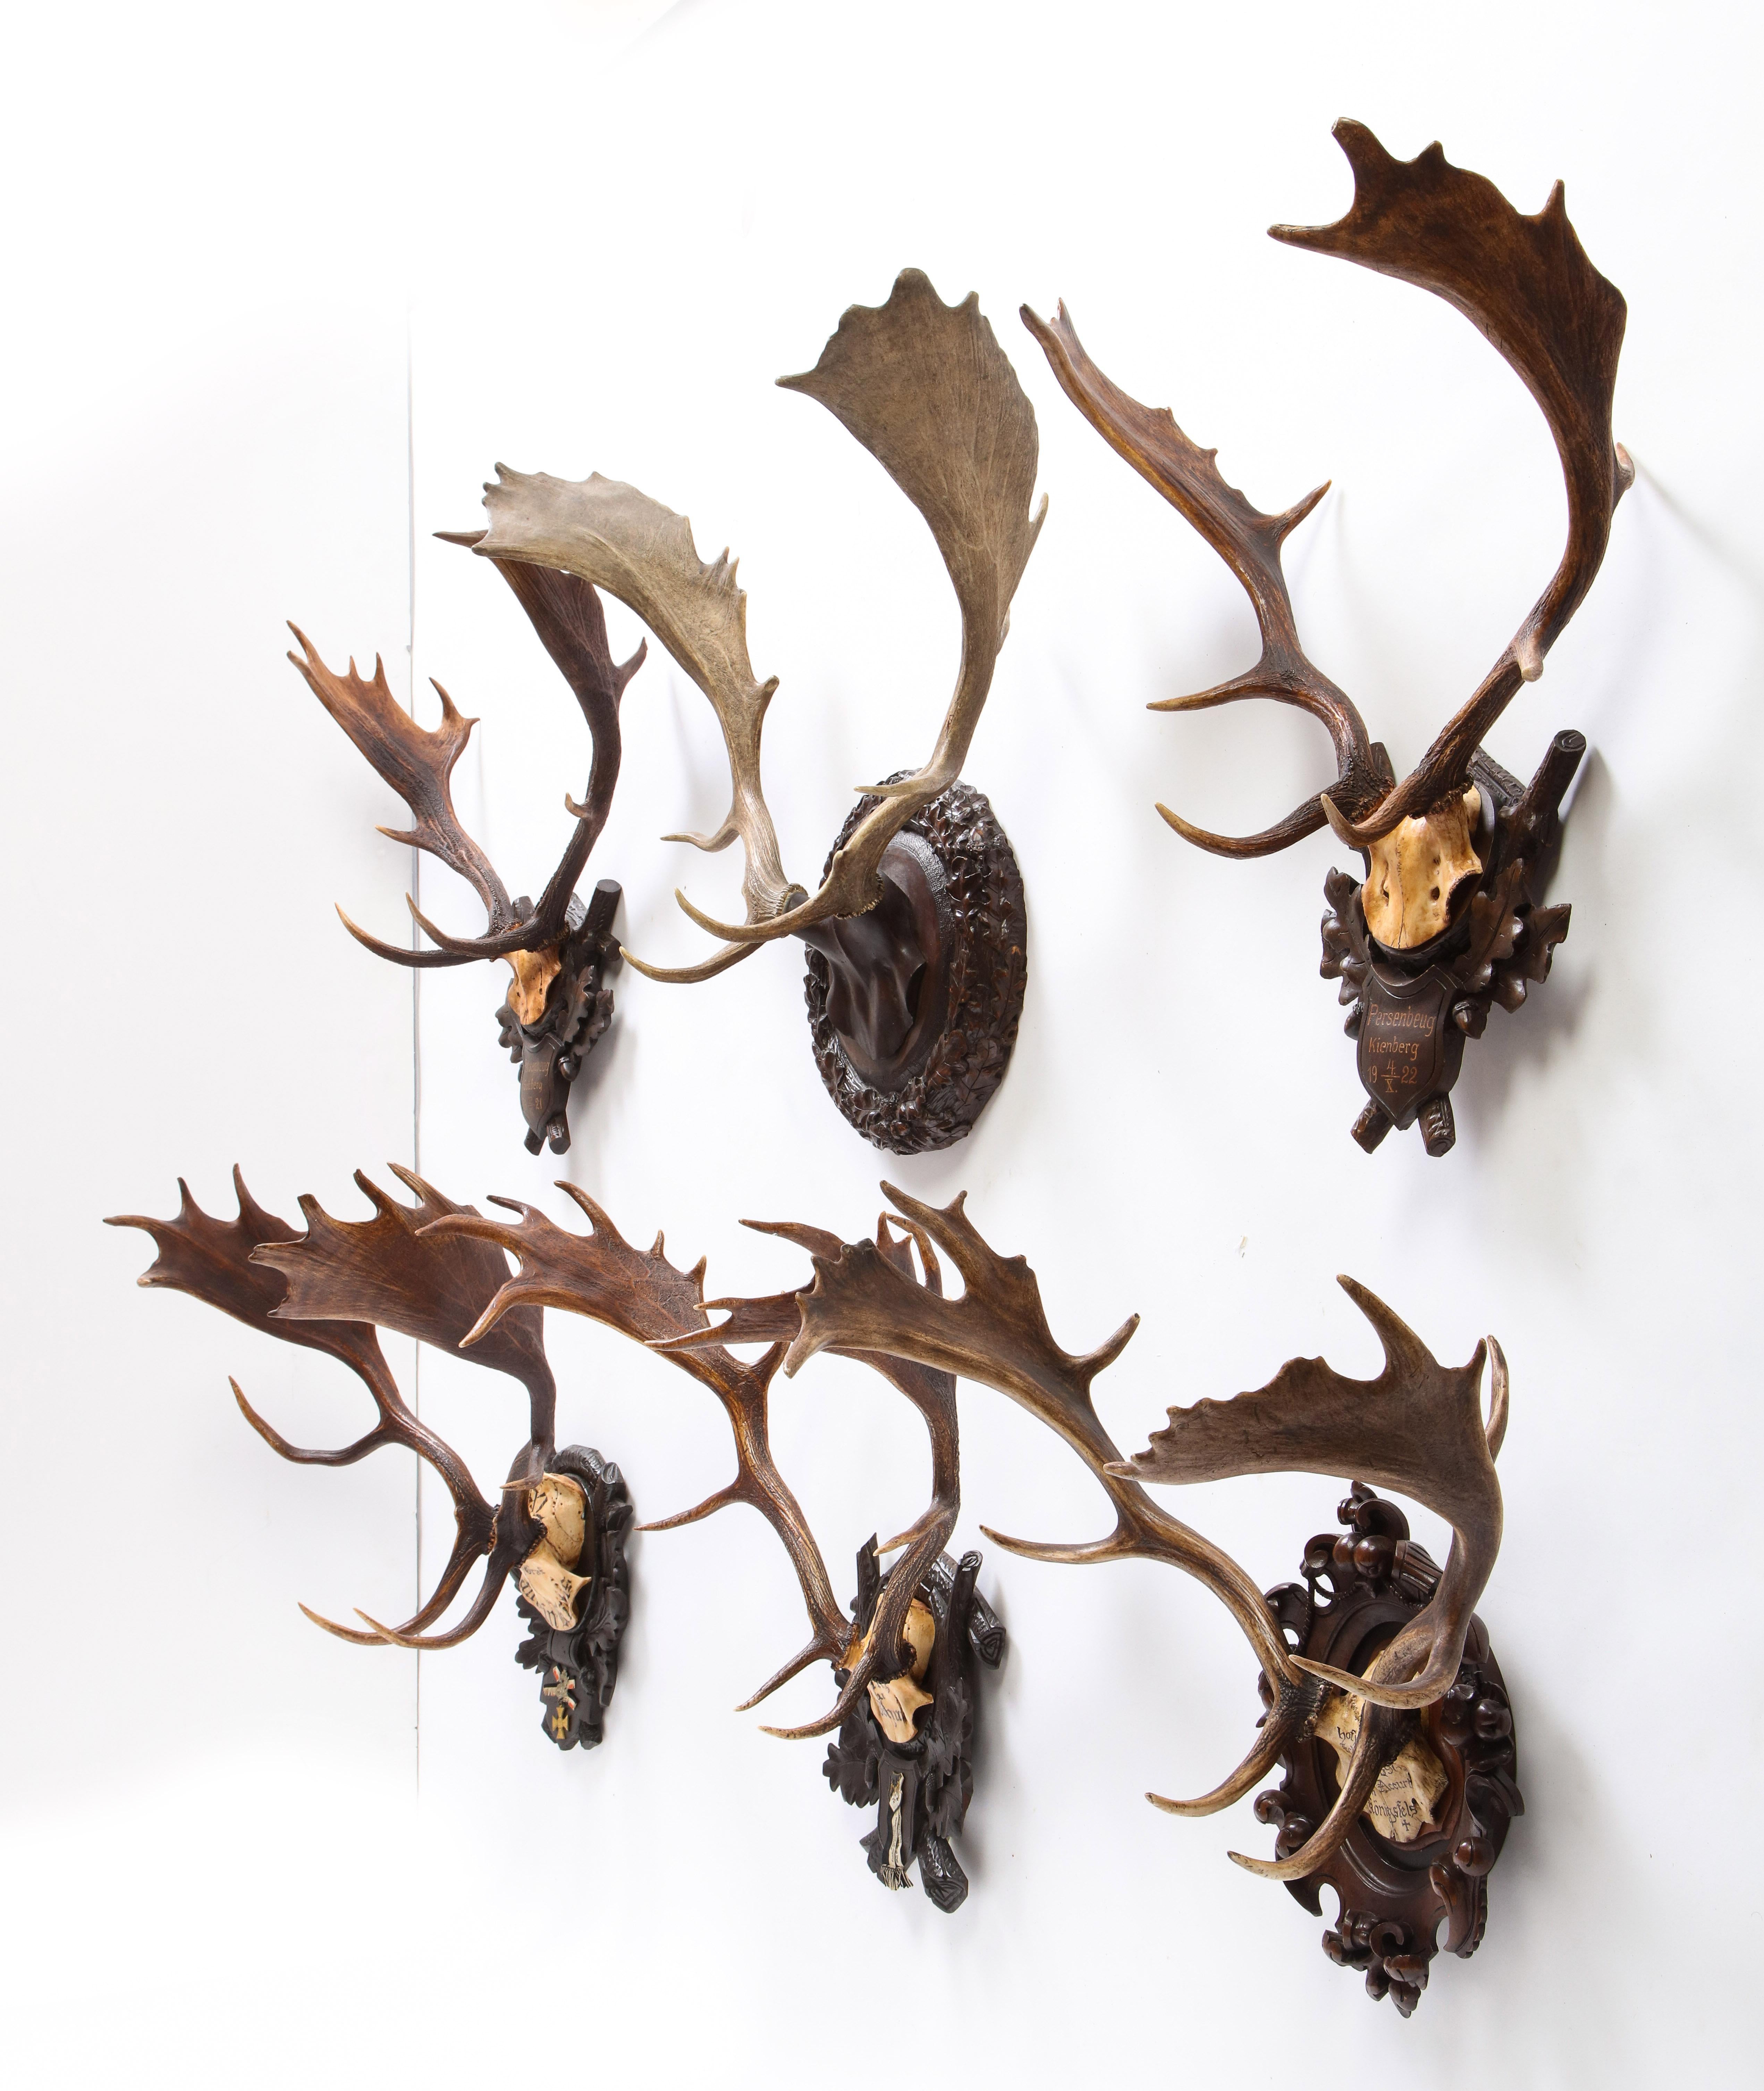 This group of six early 20th century Swiss 'Black Forest' antler trophy mounts are composed of carved wooden backplates and soaring moose antlers. Each backplate is carved with foliate decoration, including oak leaves, acorns, and c- and s-scrolls.